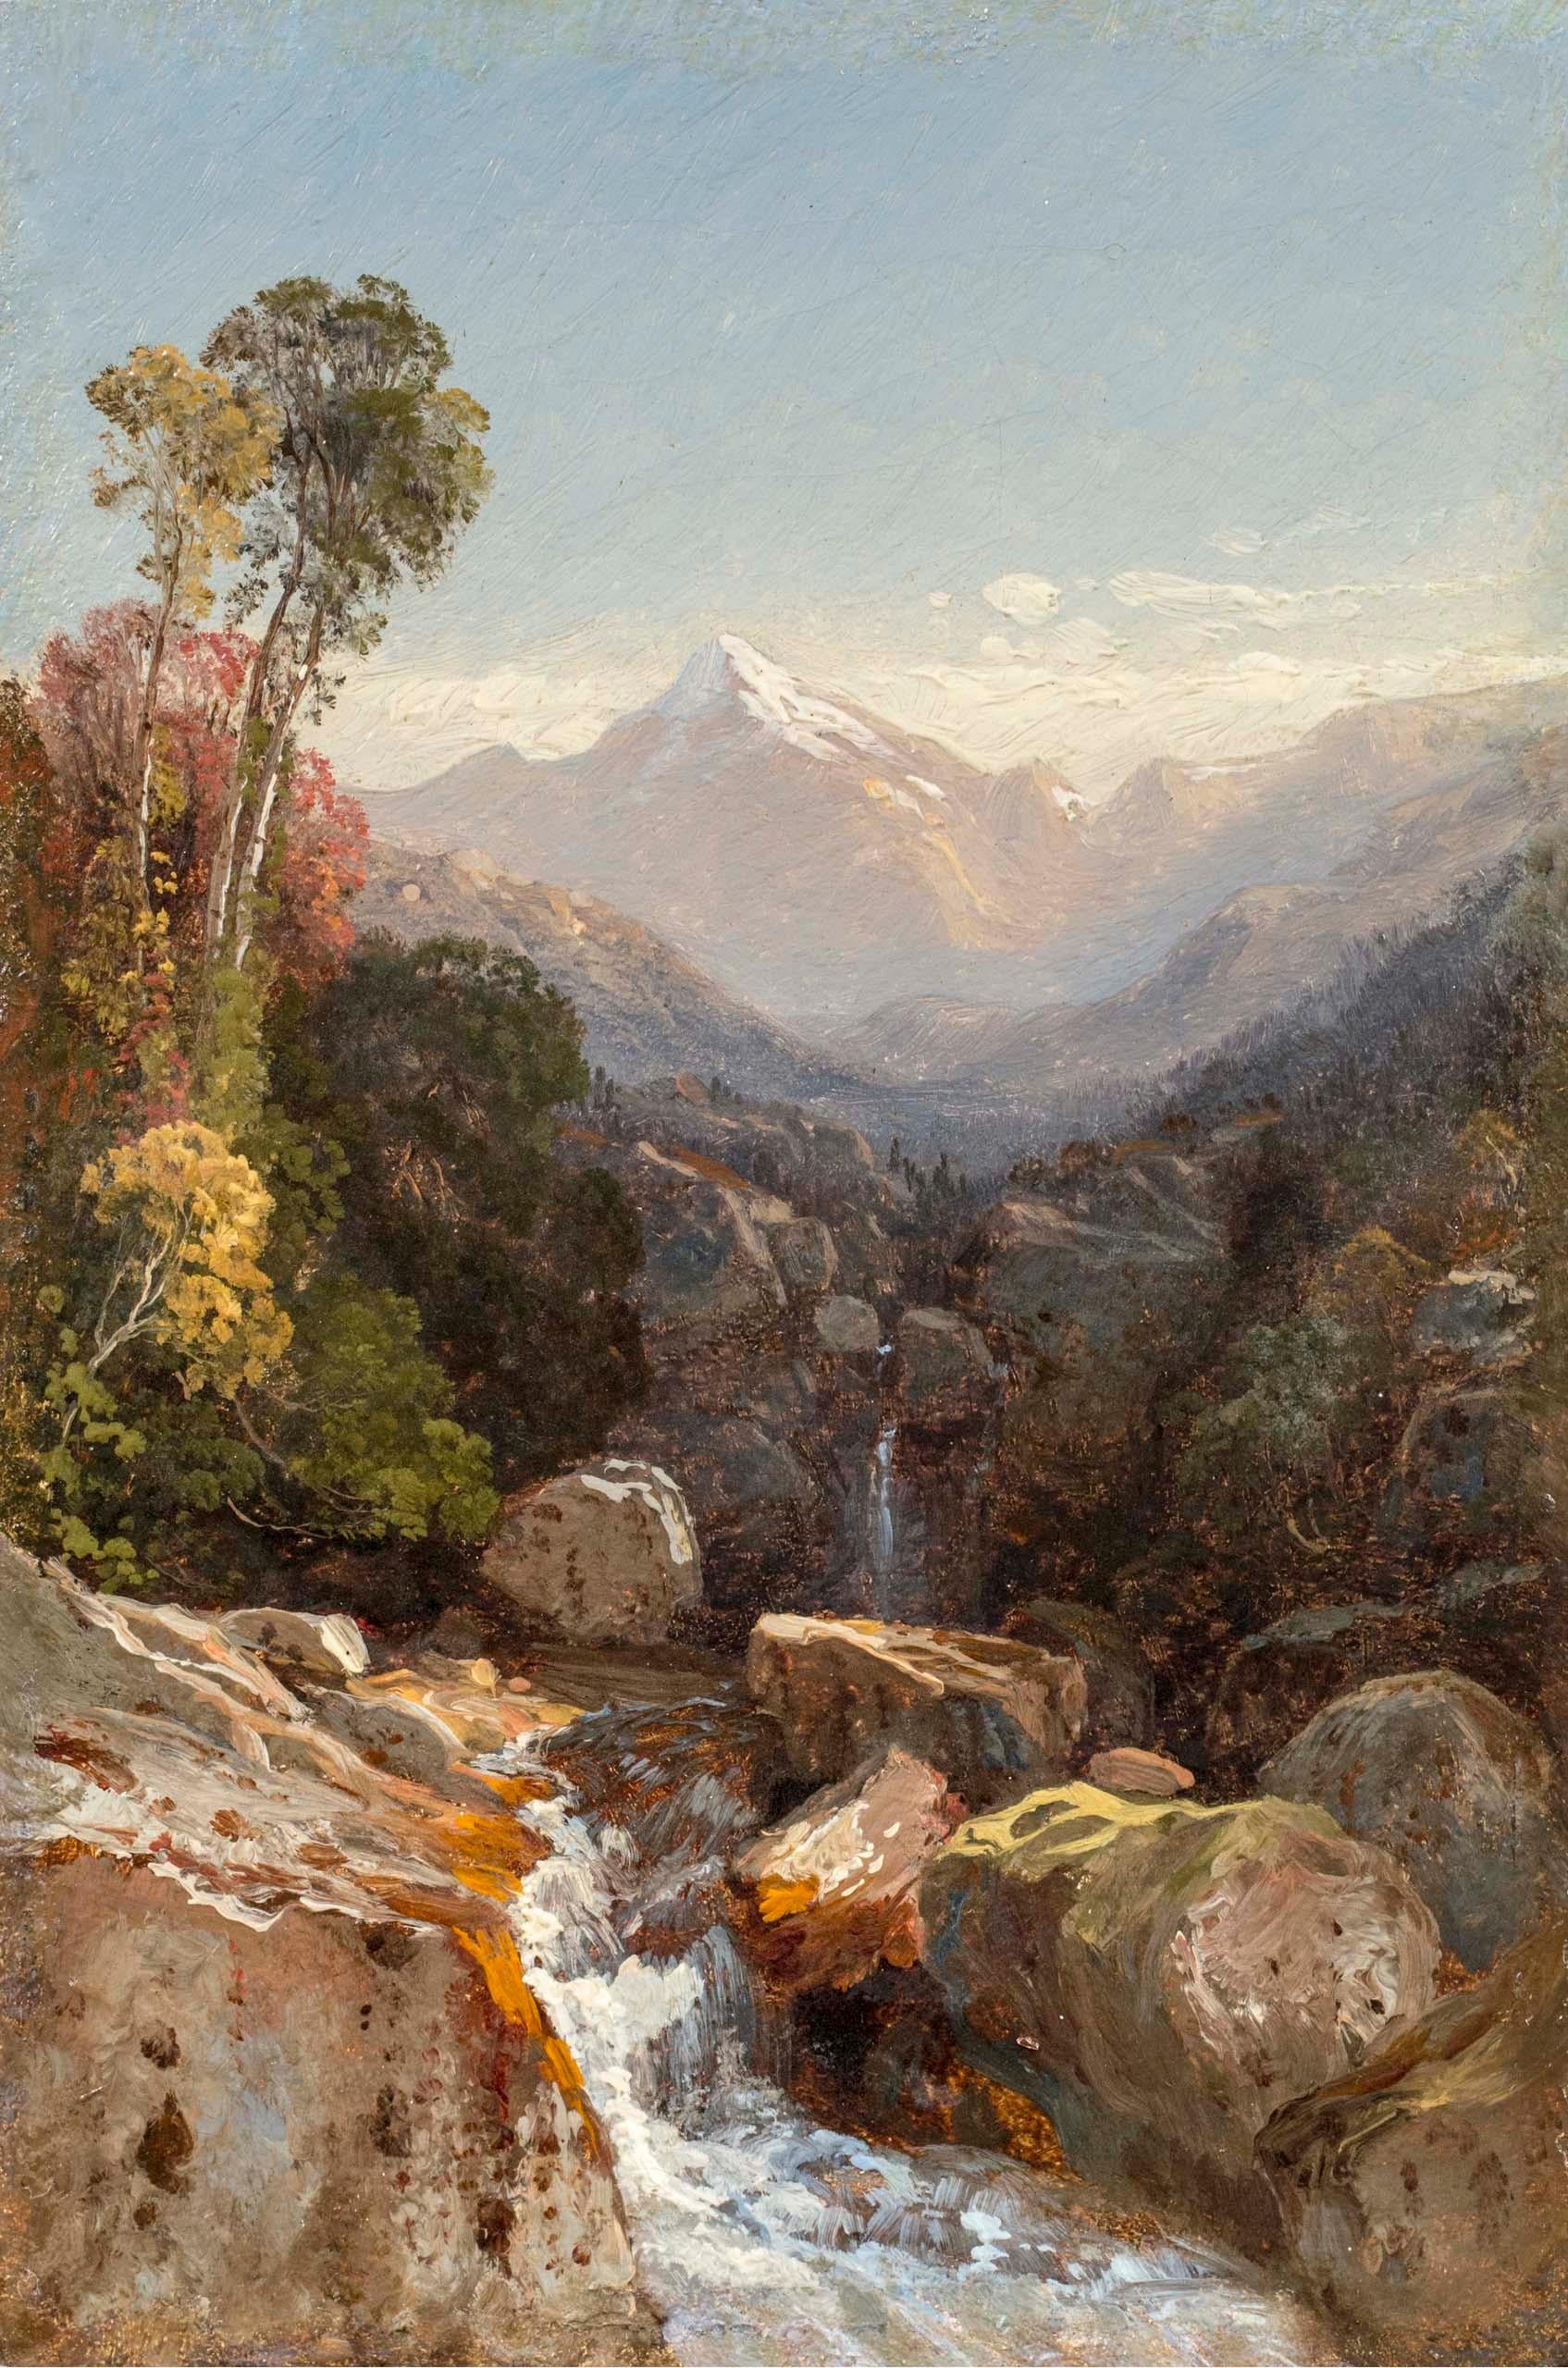 Samuel Colman (1832-1920)
In the White Mountains
Oil on panel
9 7/16 X 6 5/16 inches

In 1867, prominent critic Henry Tuckerman wrote that, “to the eye of refined taste, to the quiet lover of nature, there is a peculiar charm in Colman’s style